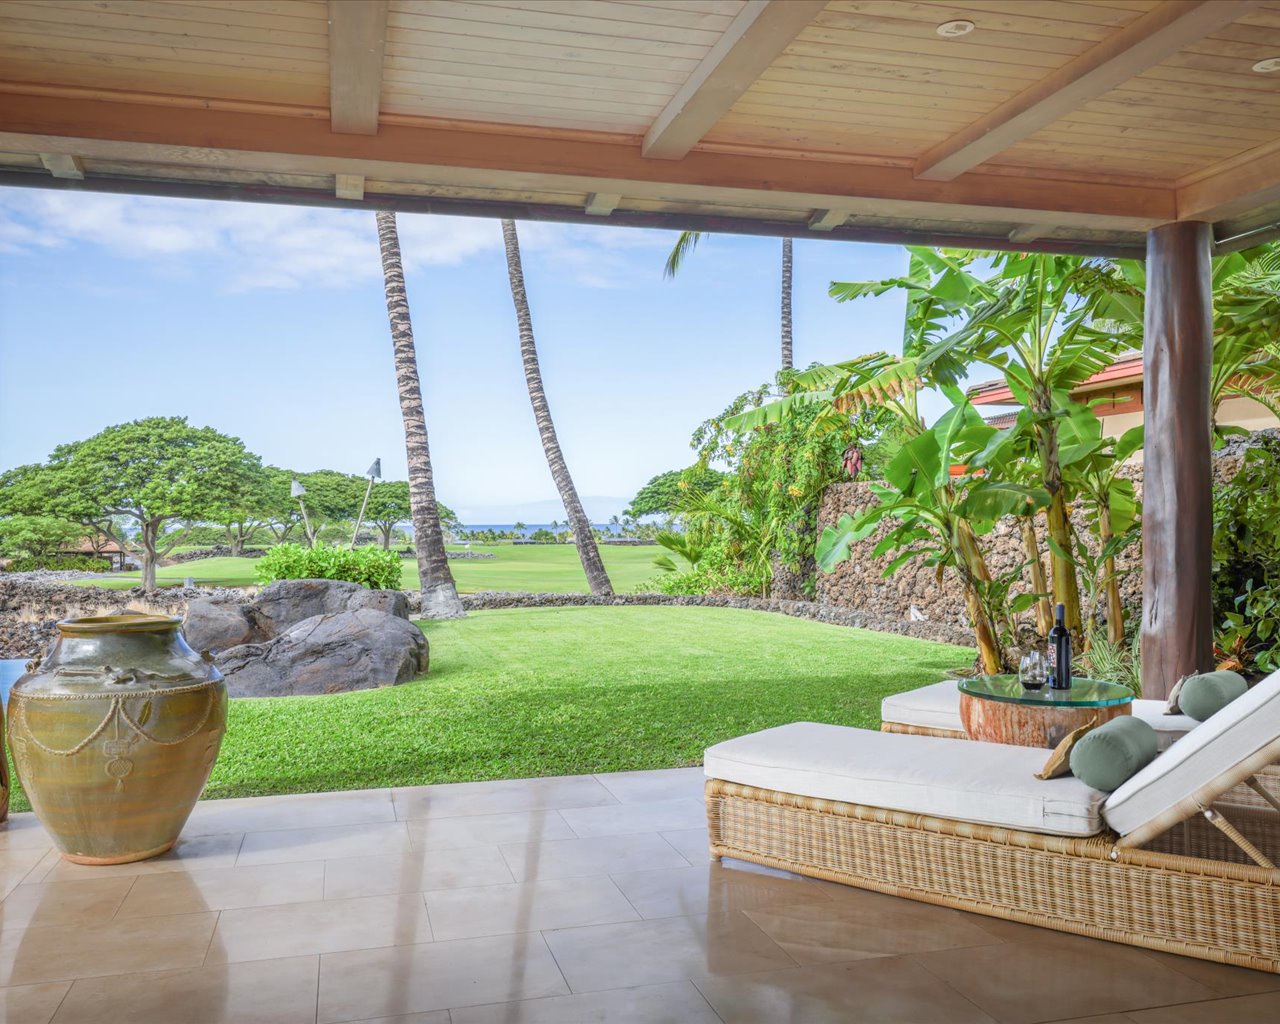 Kailua Kona Vacation Rentals, 3BD Pakui Street (131) Estate Home at Four Seasons Resort at Hualalai - Unwind on the primary bedroom lanai with picture-perfect views